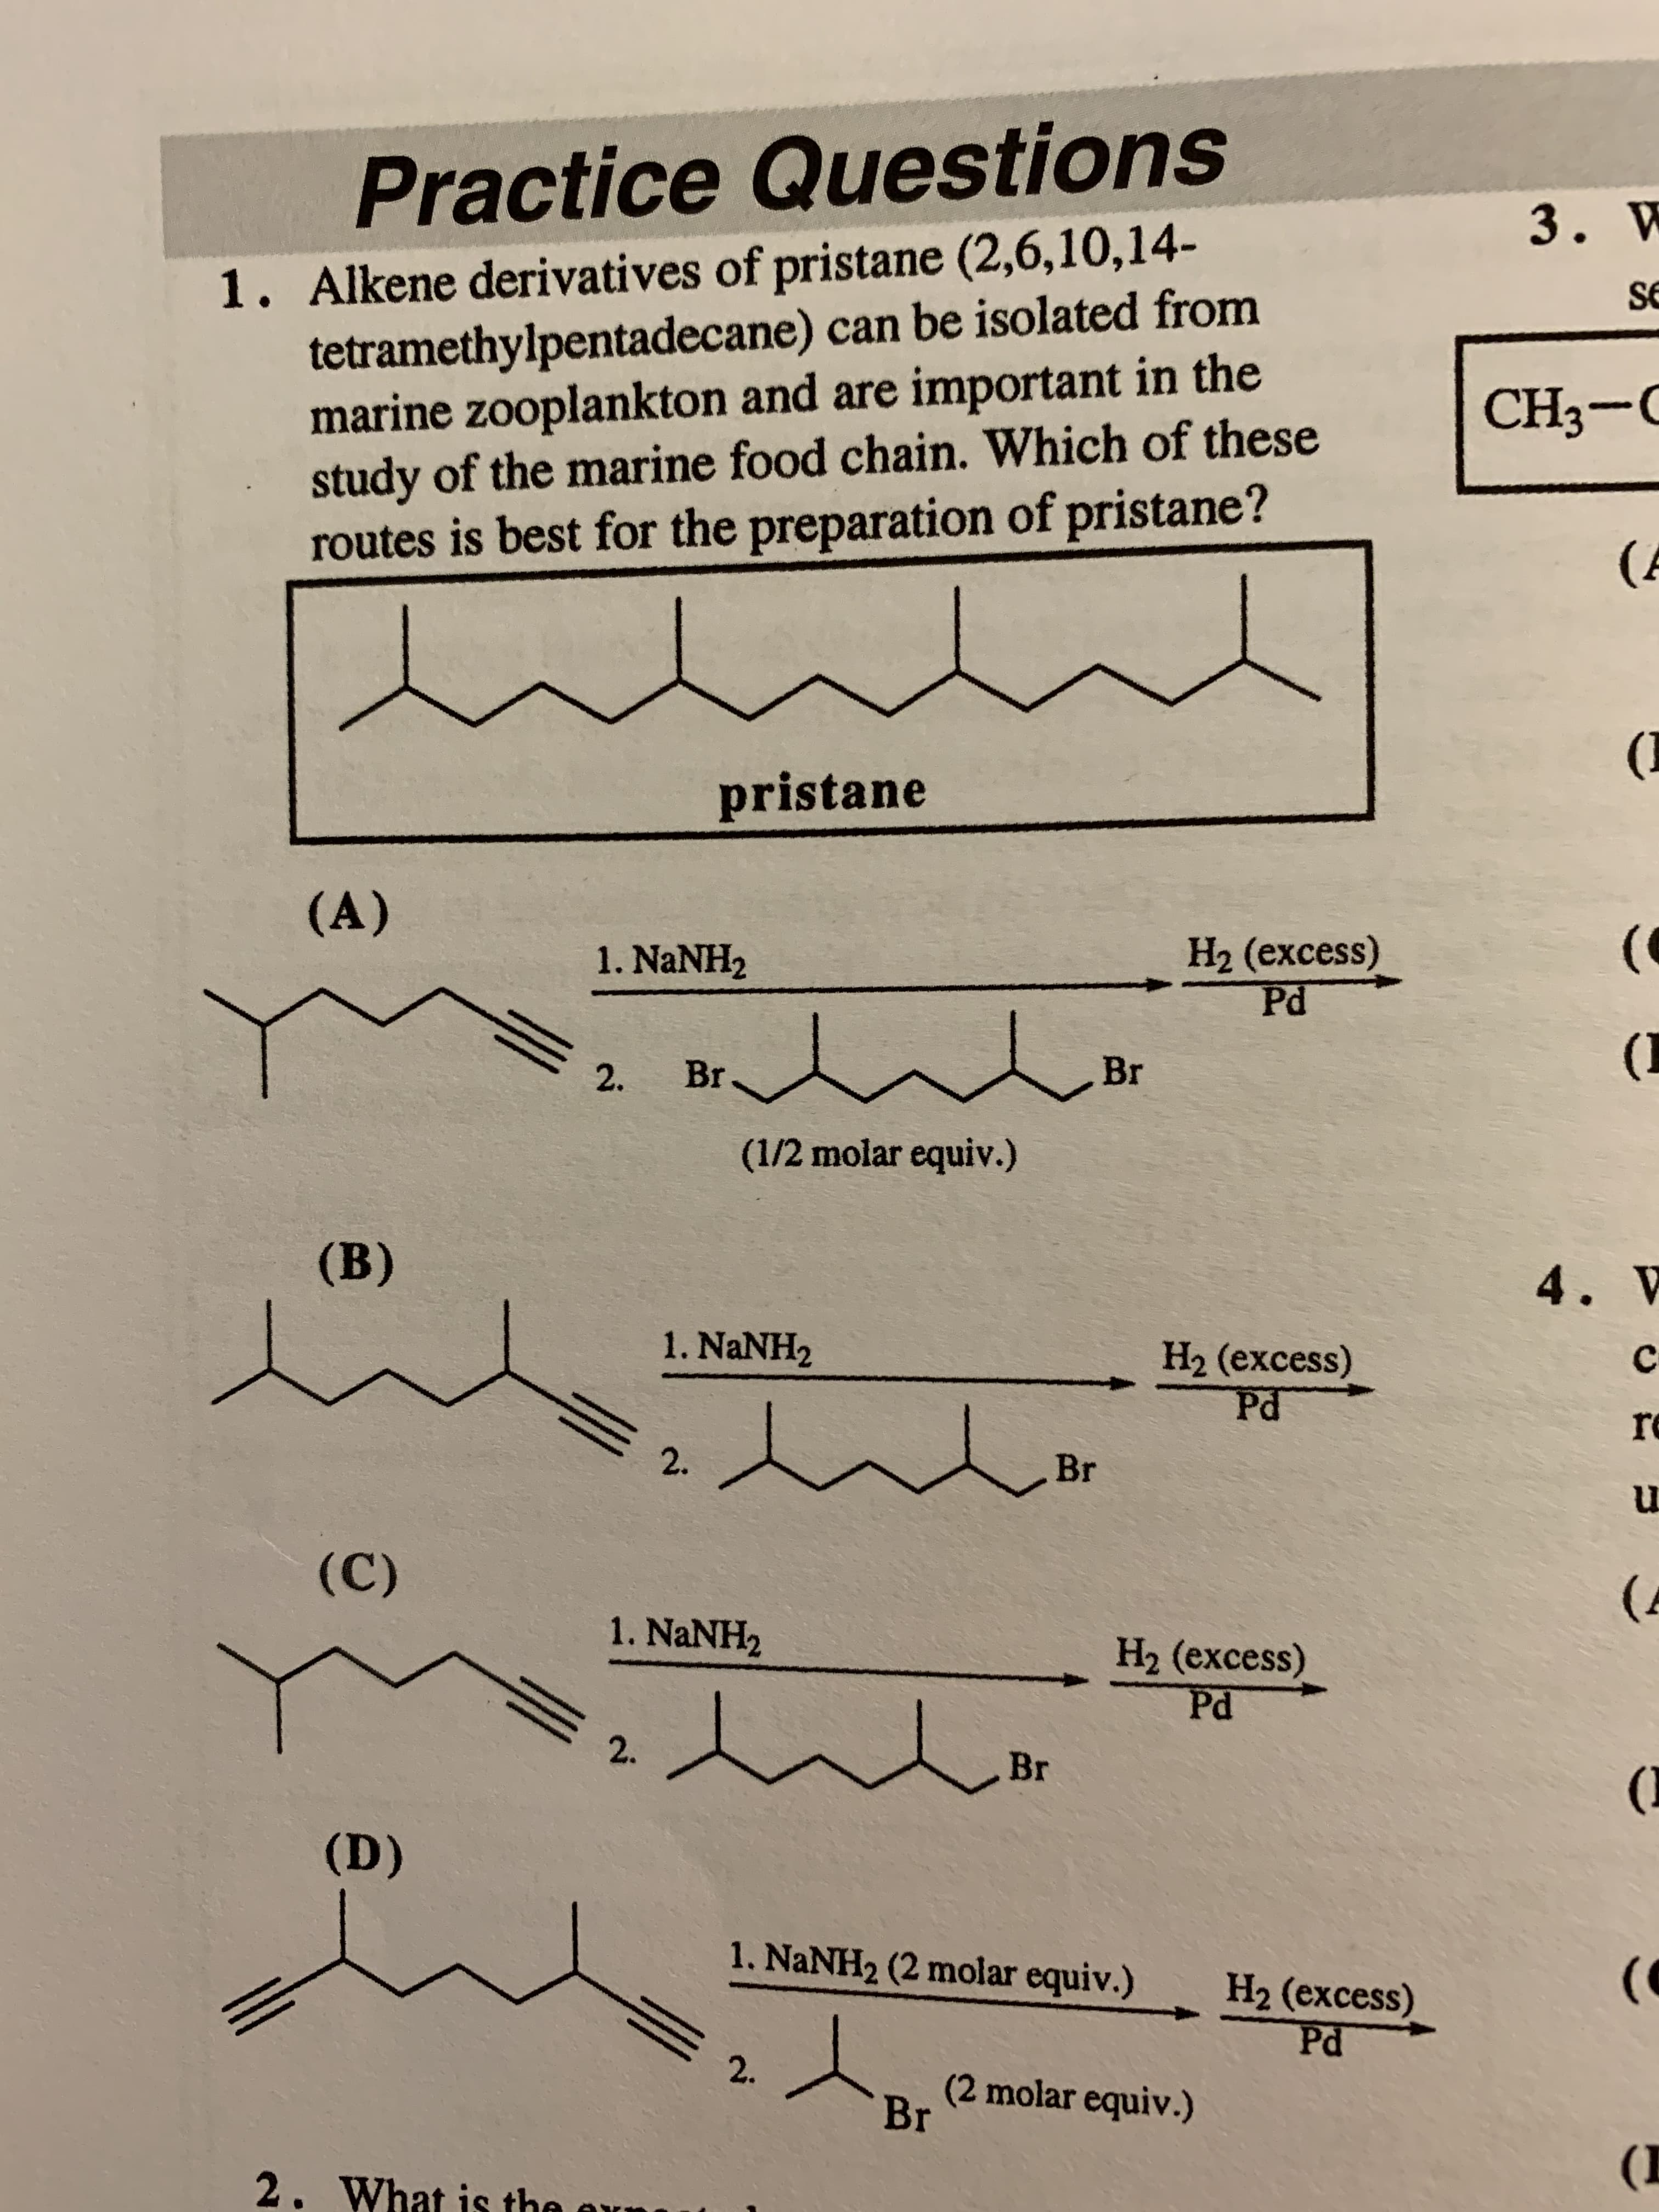 Alkene derivatives of pristane (2,6,10,14-
tetramethylpentadecane) can be isolated from
marine zooplankton and are important in the
study of the marine food chain. Which of these
routes is best for the preparation of pristane?
pristane
